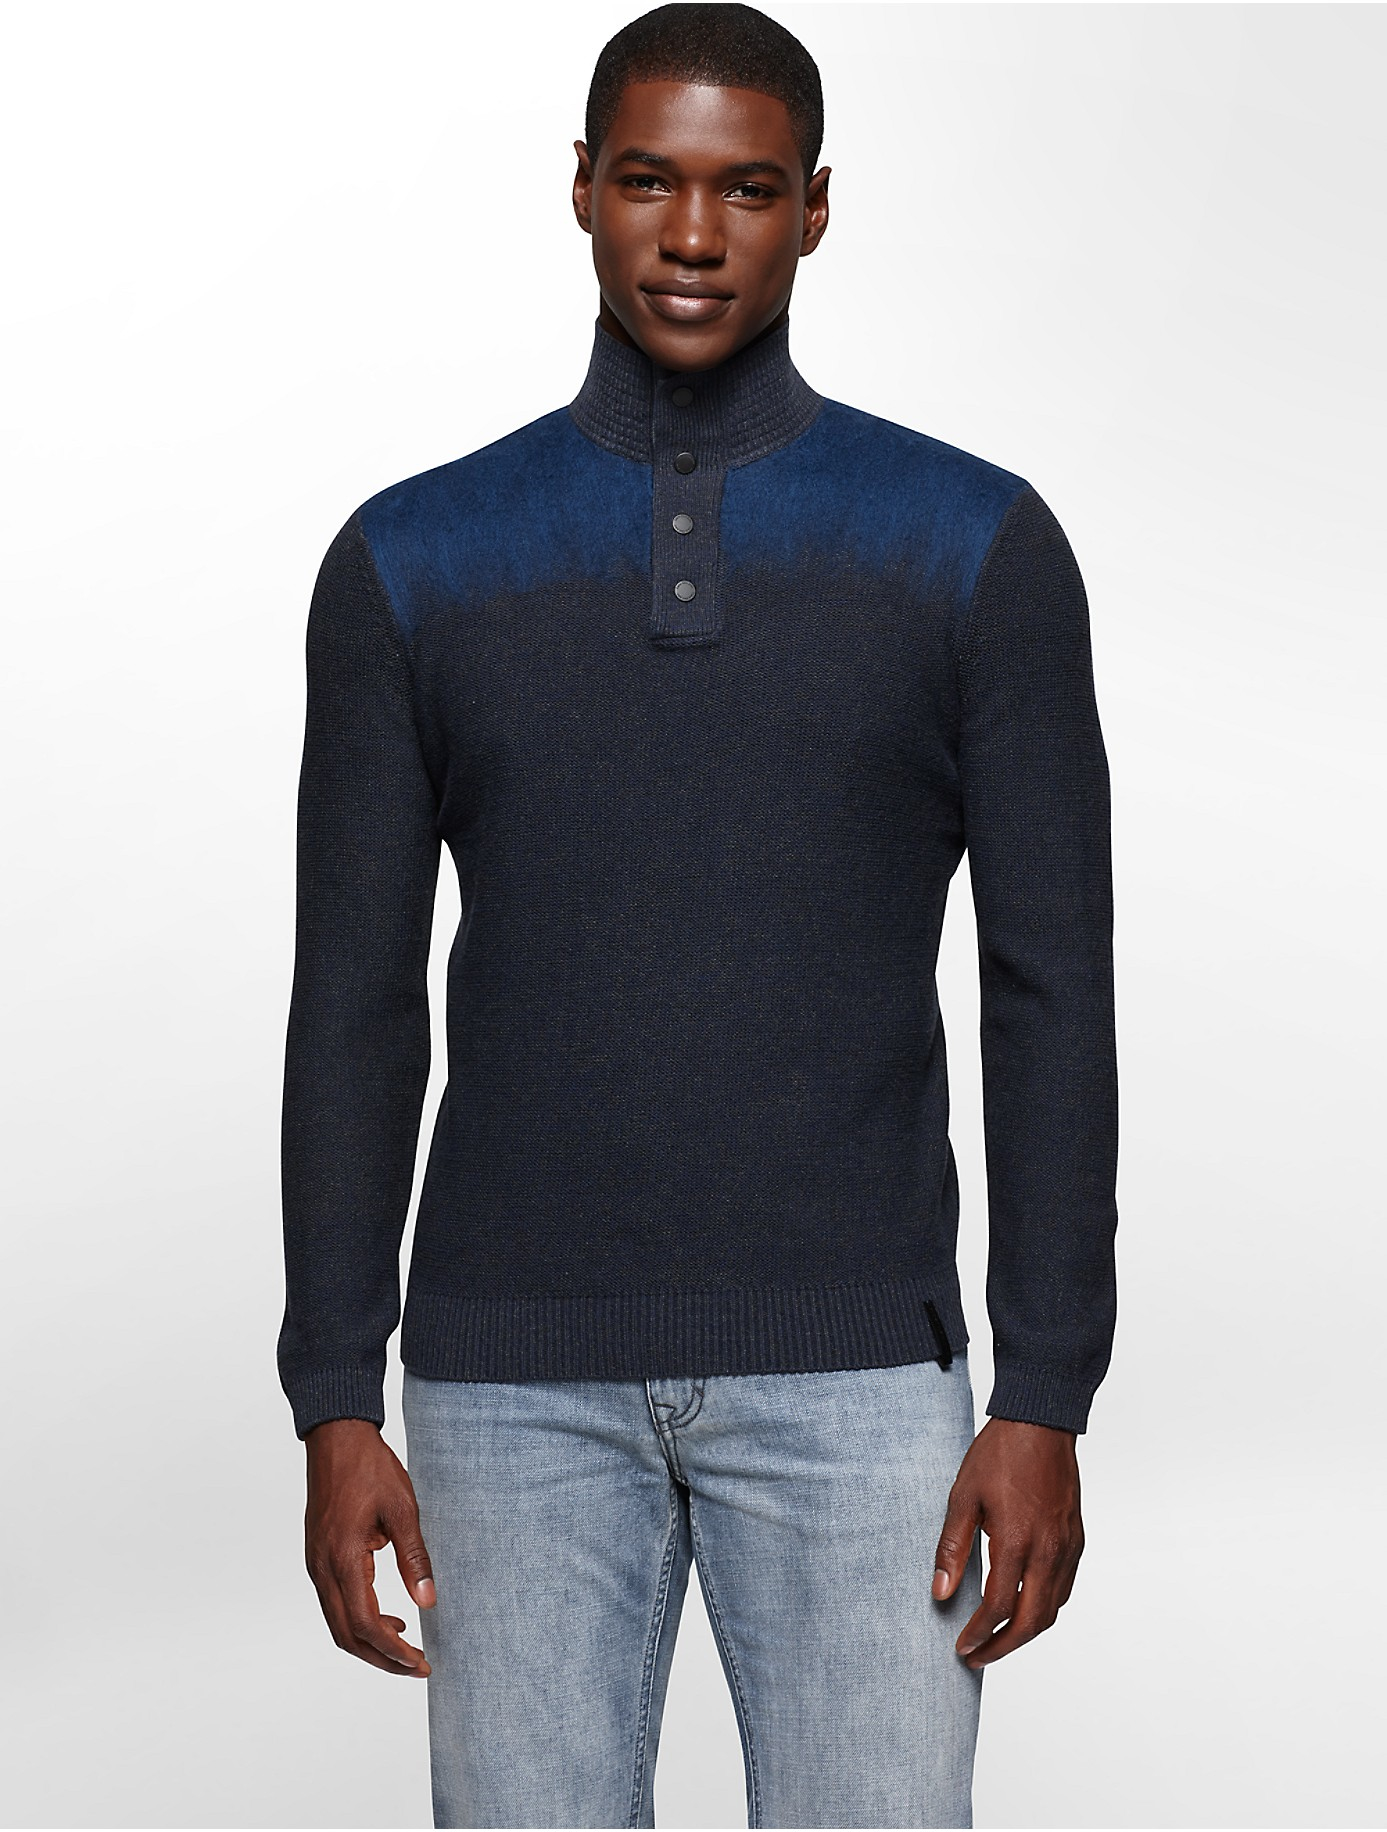 Lyst - Calvin klein Jeans Electric Felted Mock Neck Sweater in Blue for Men